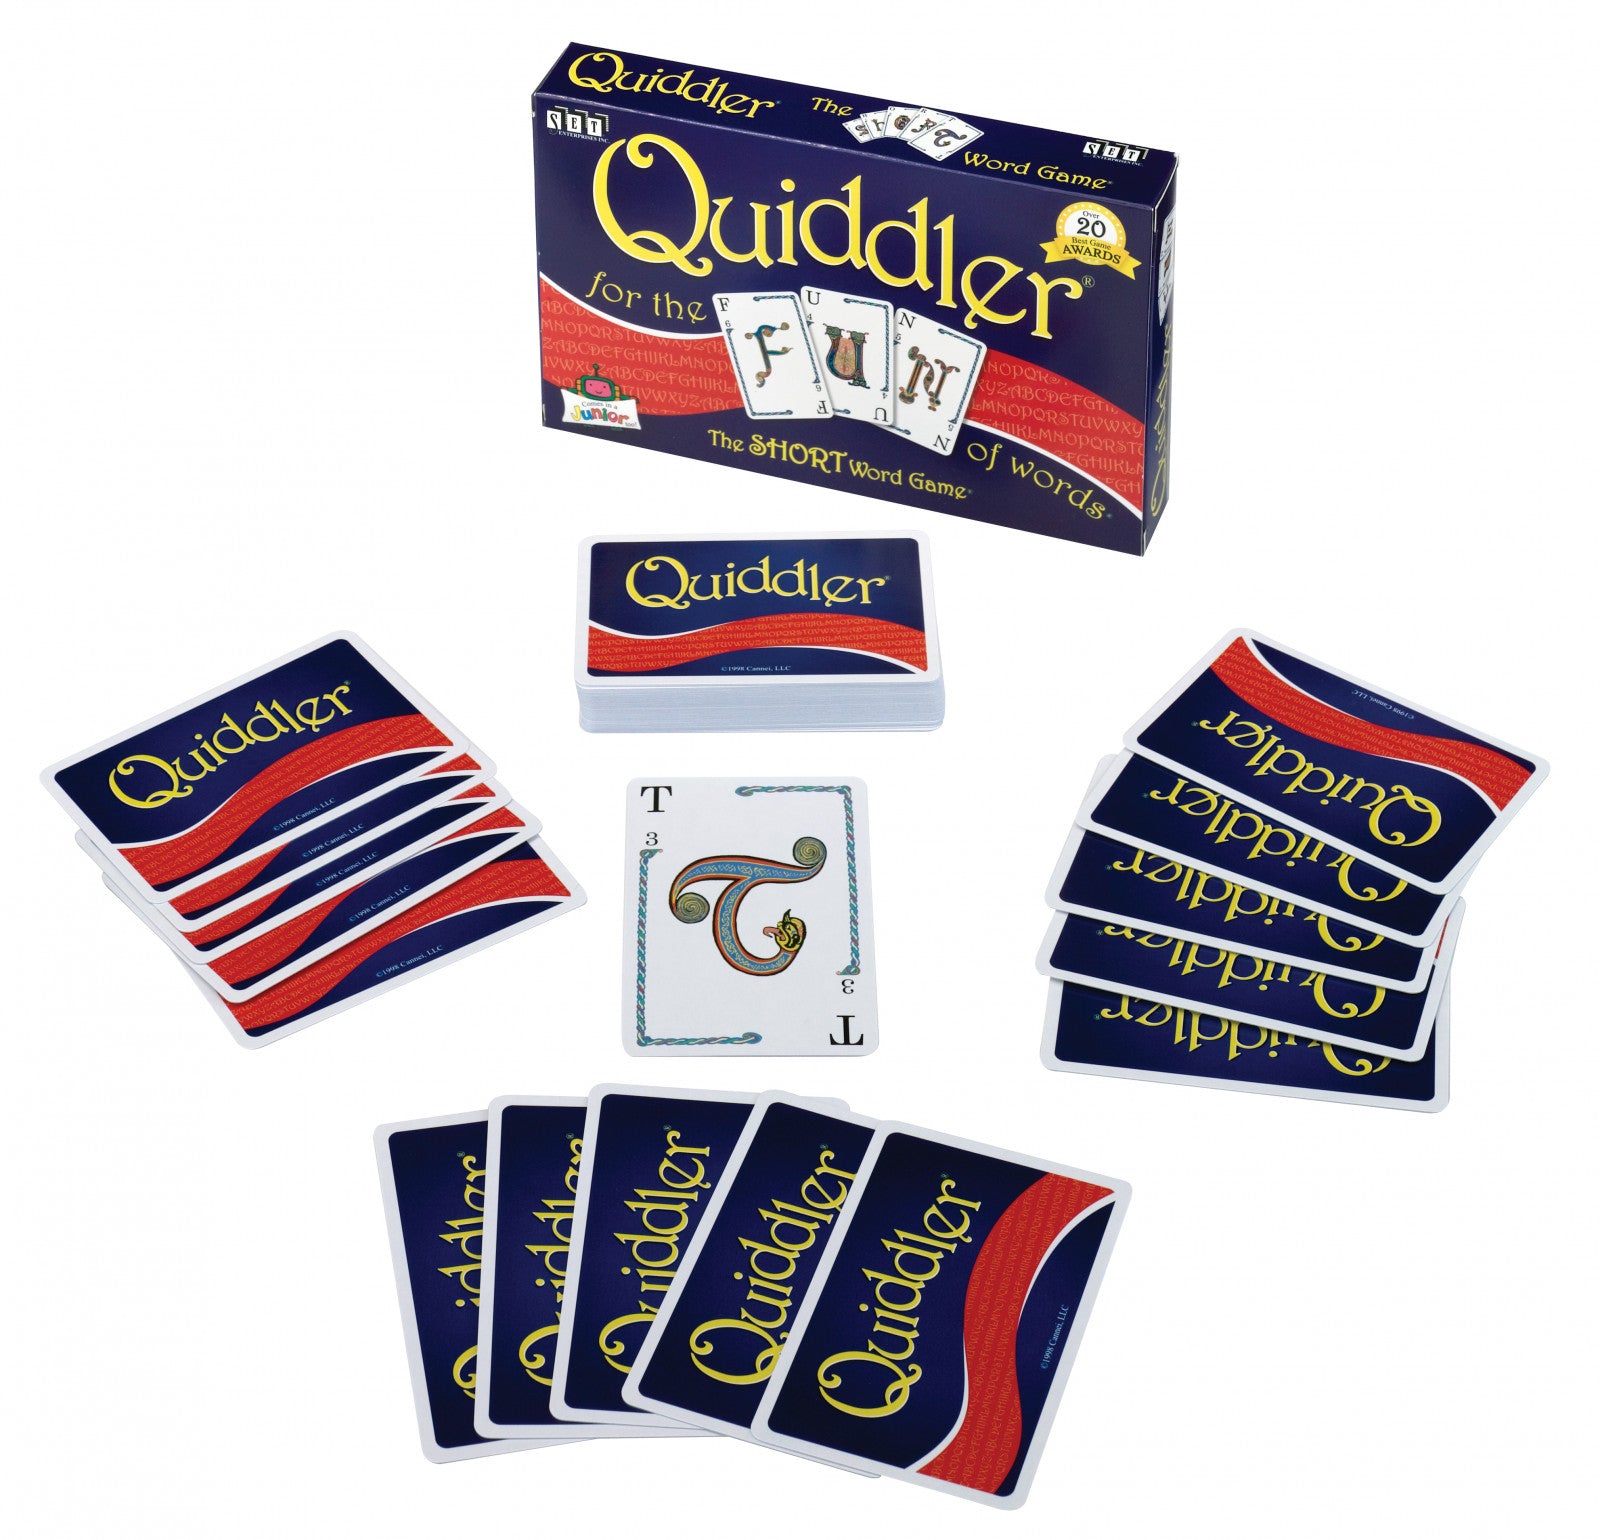 Quiddler Card Game - Toybox Tales